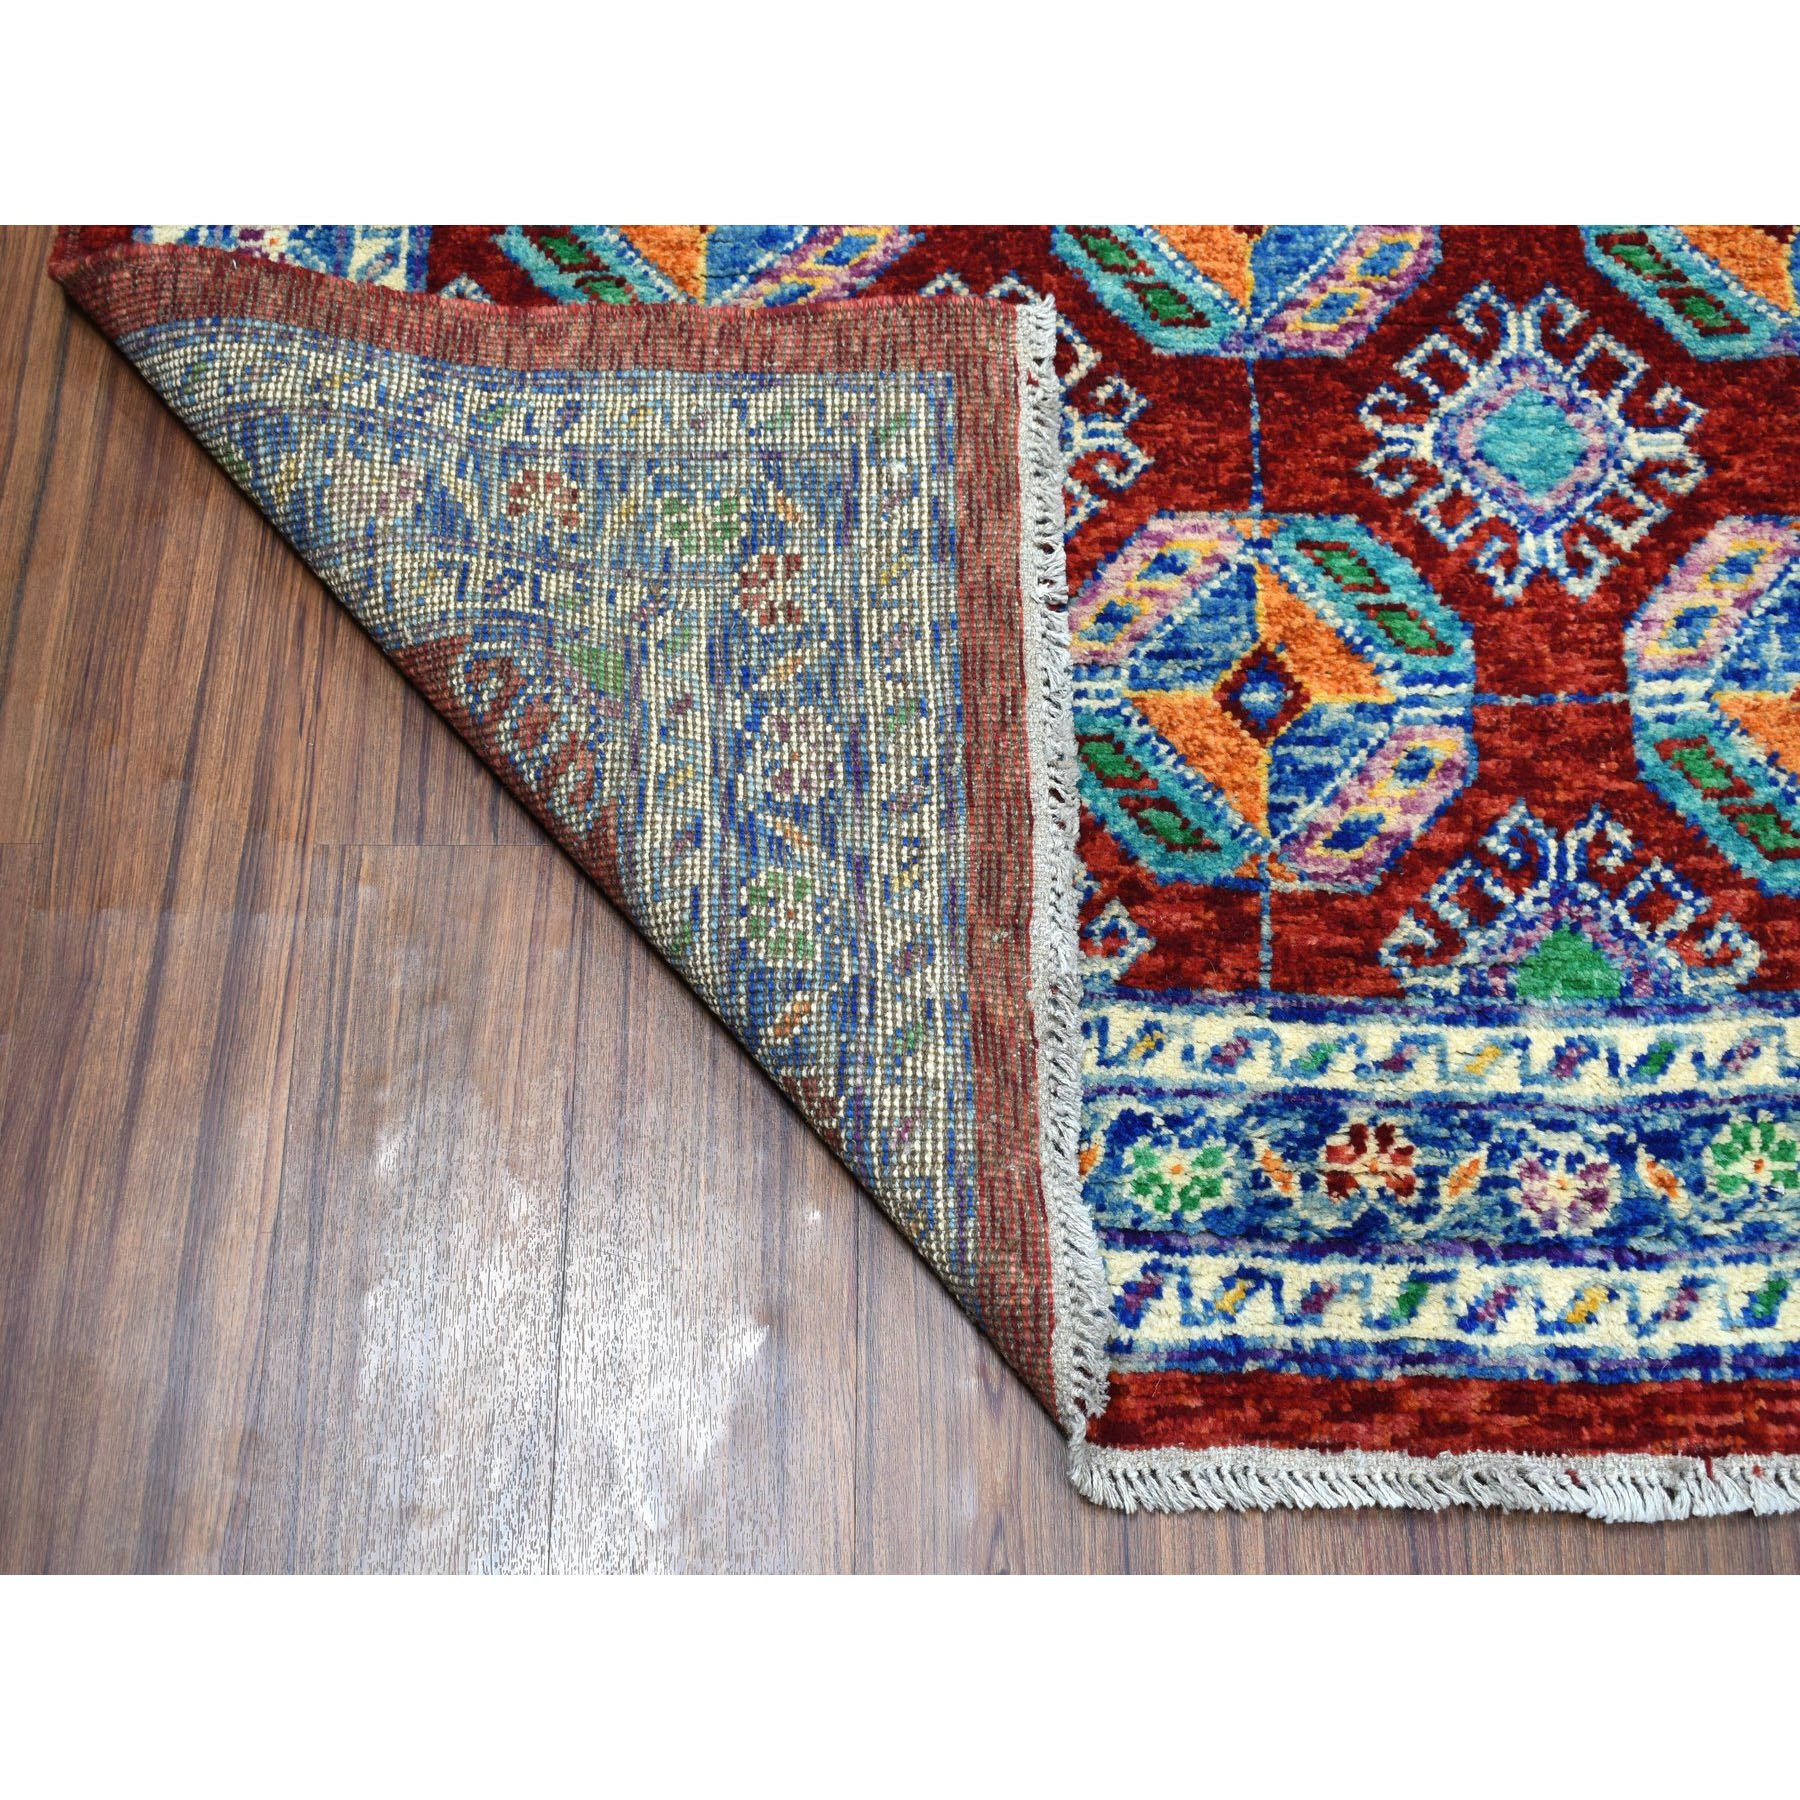 6'9"x8'7" Red Elephant Feet Design Colorful Afghan Baluch Hand Woven Pure Wool Oriental Rug 